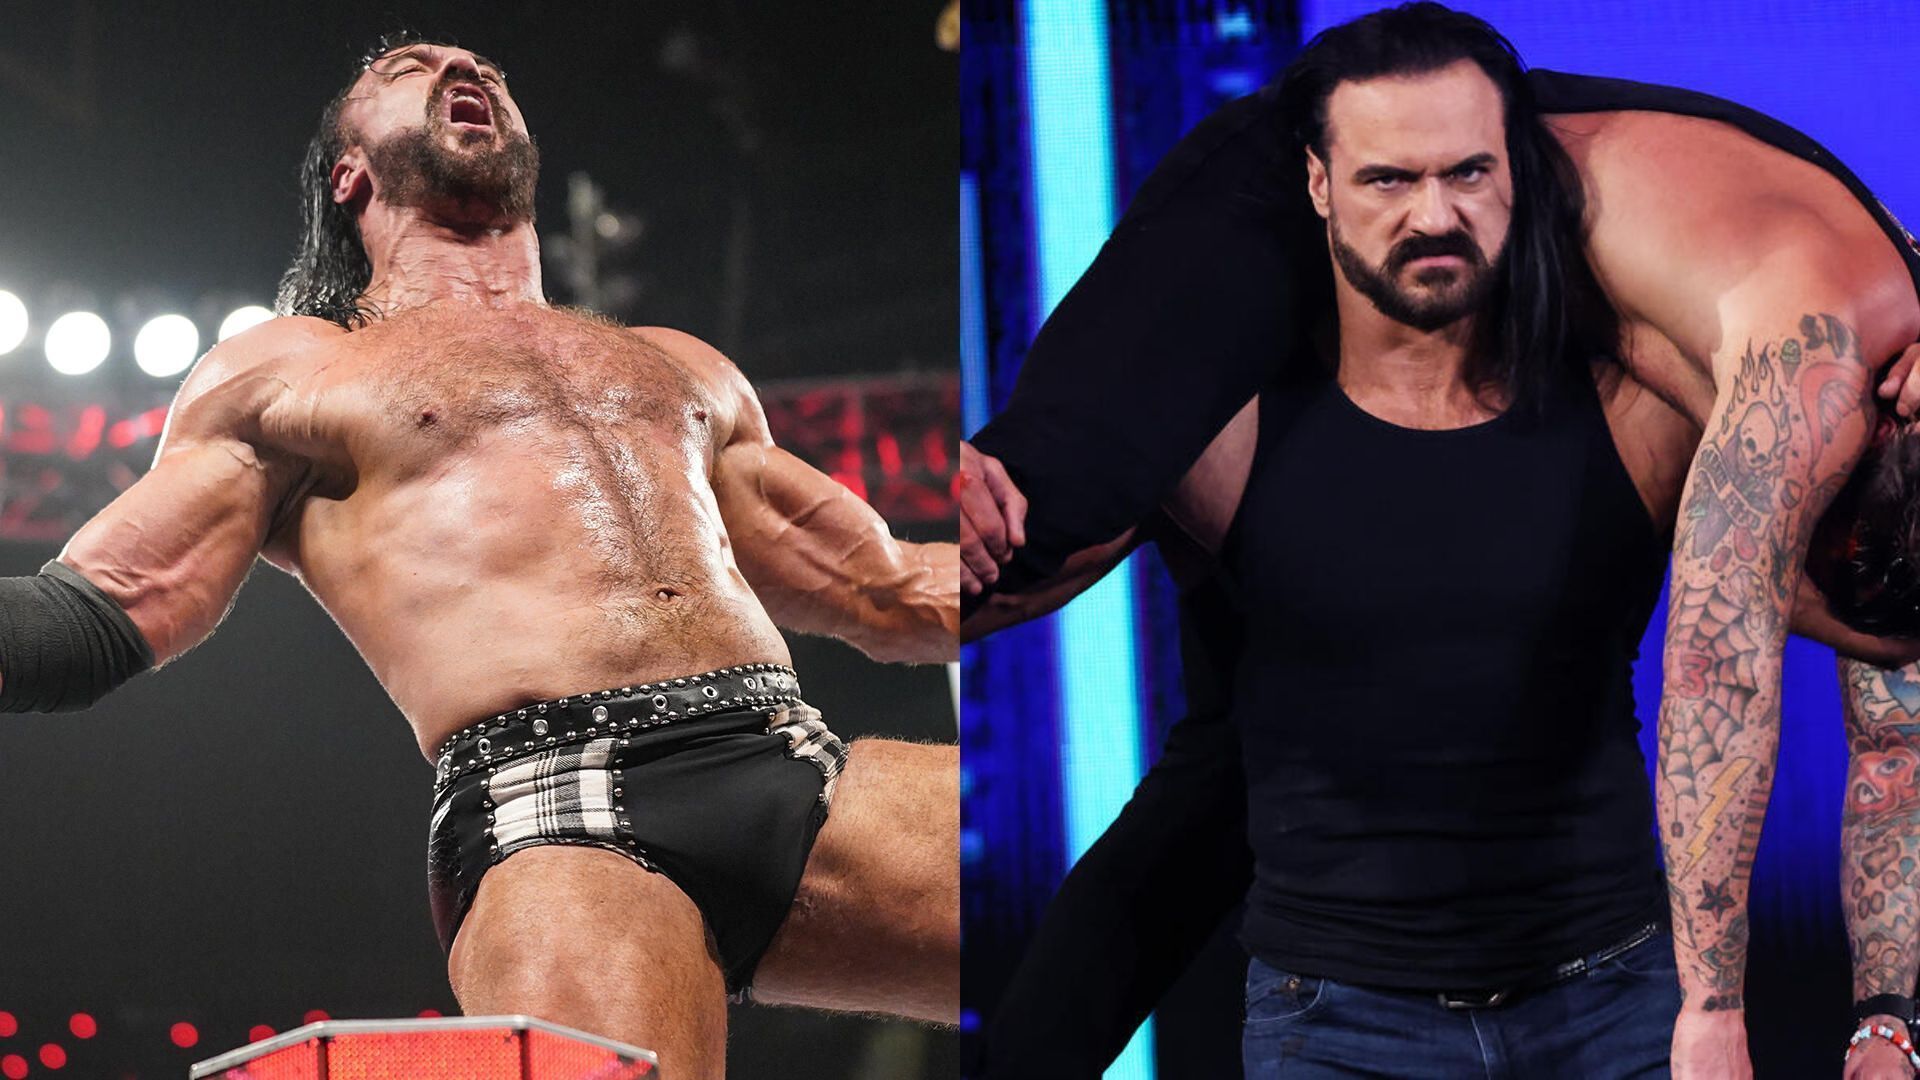 Drew McIntyre has been feuding with CM Punk for months (Image Credits: WWE.com)